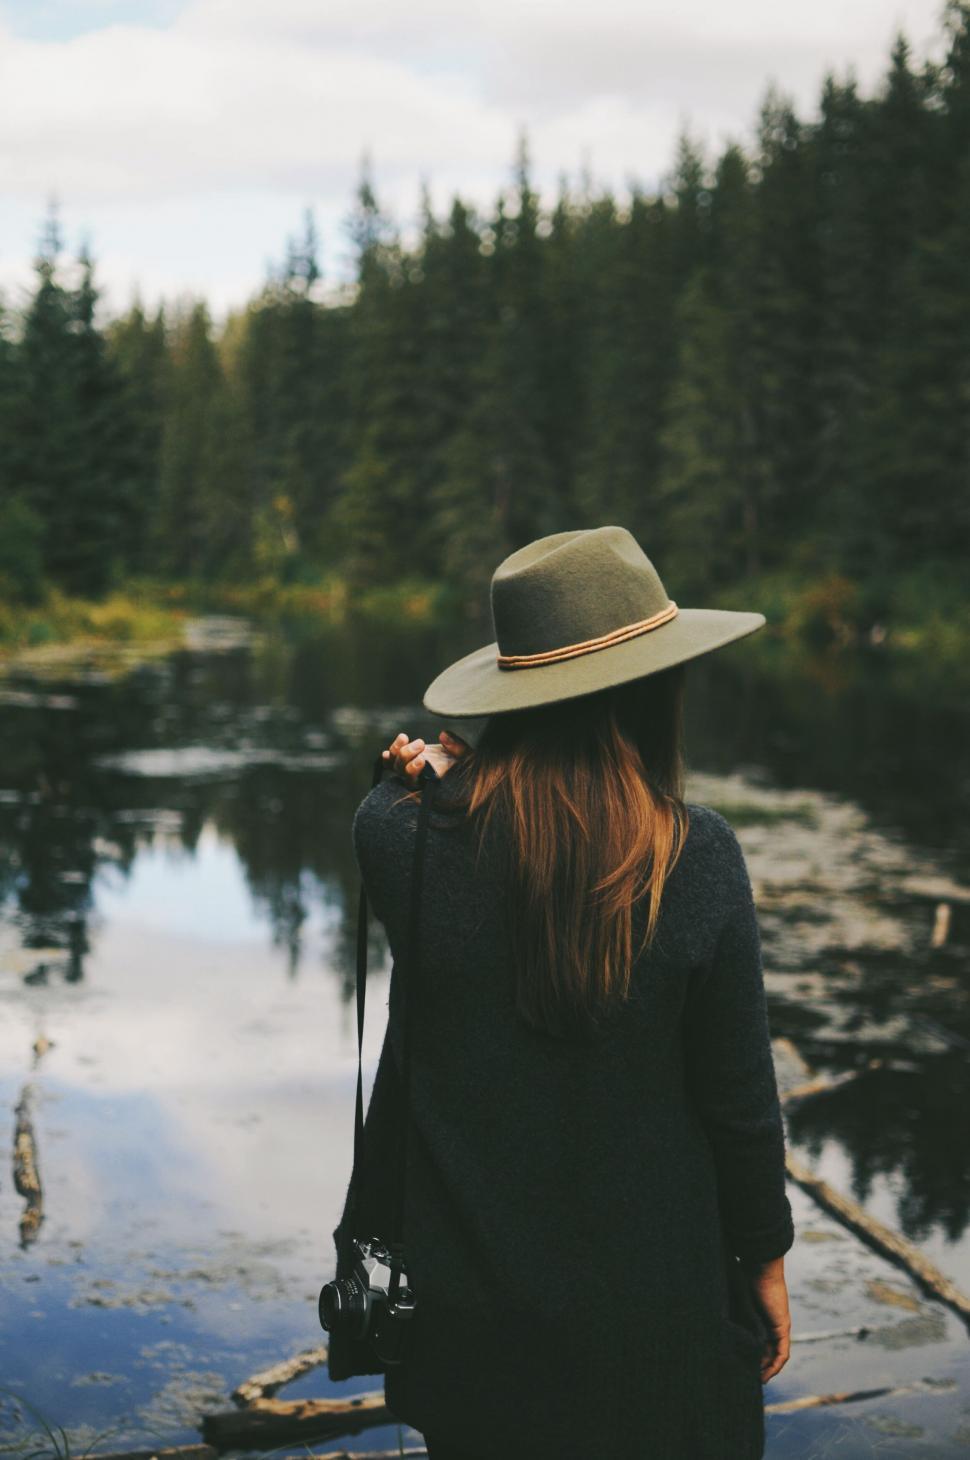 Free Image of Woman in Hat Contemplating Forest Lake 